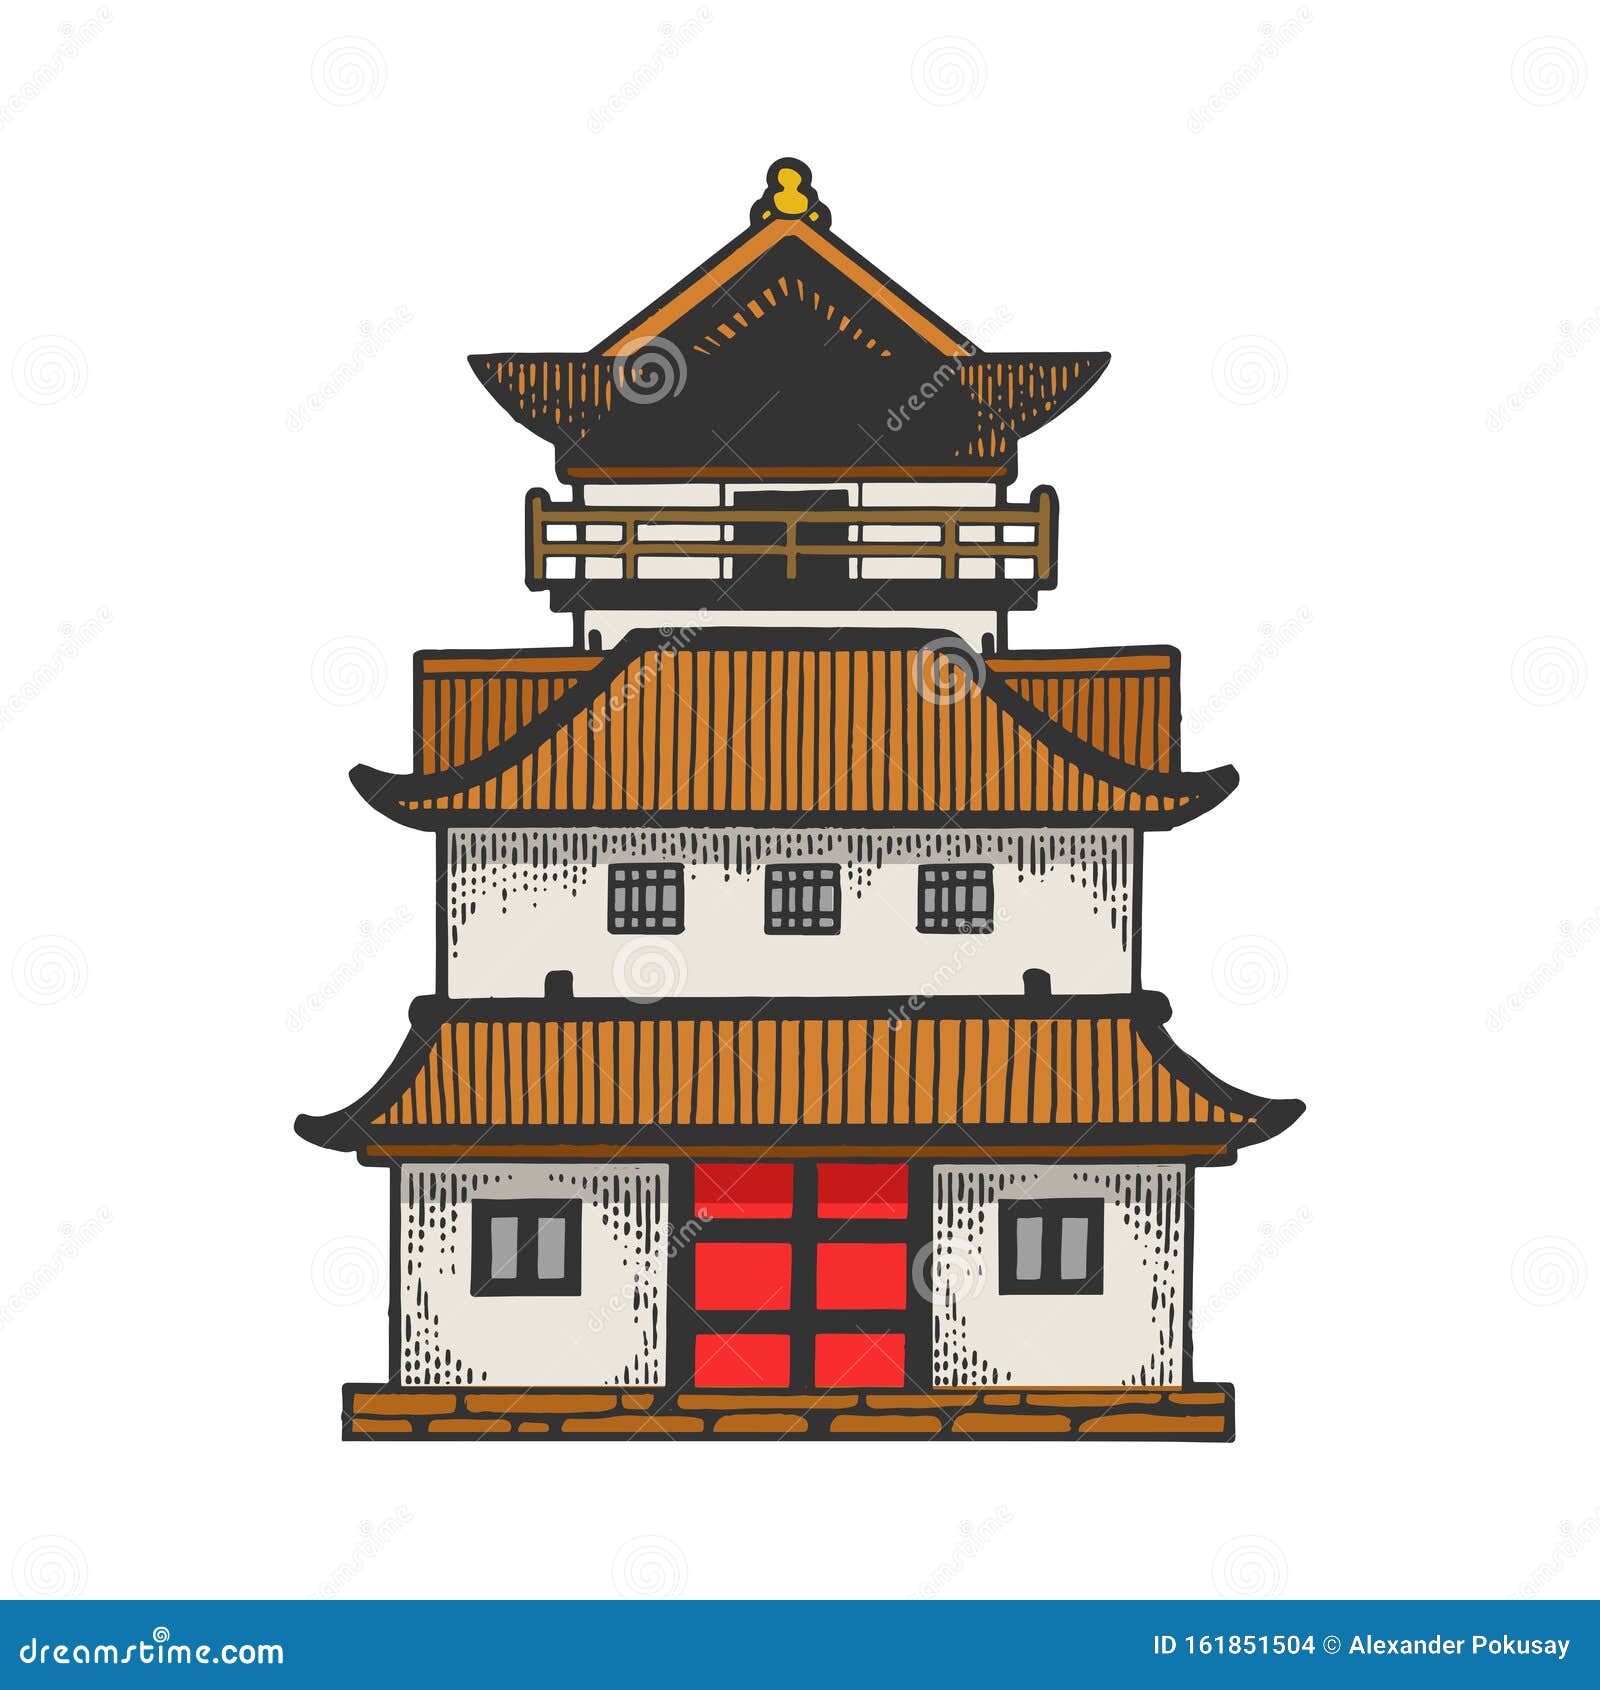 How To Draw A Pagoda, Japanese Pagoda, Step by Step, Drawing Guide, by  finalprodigy - DragoArt